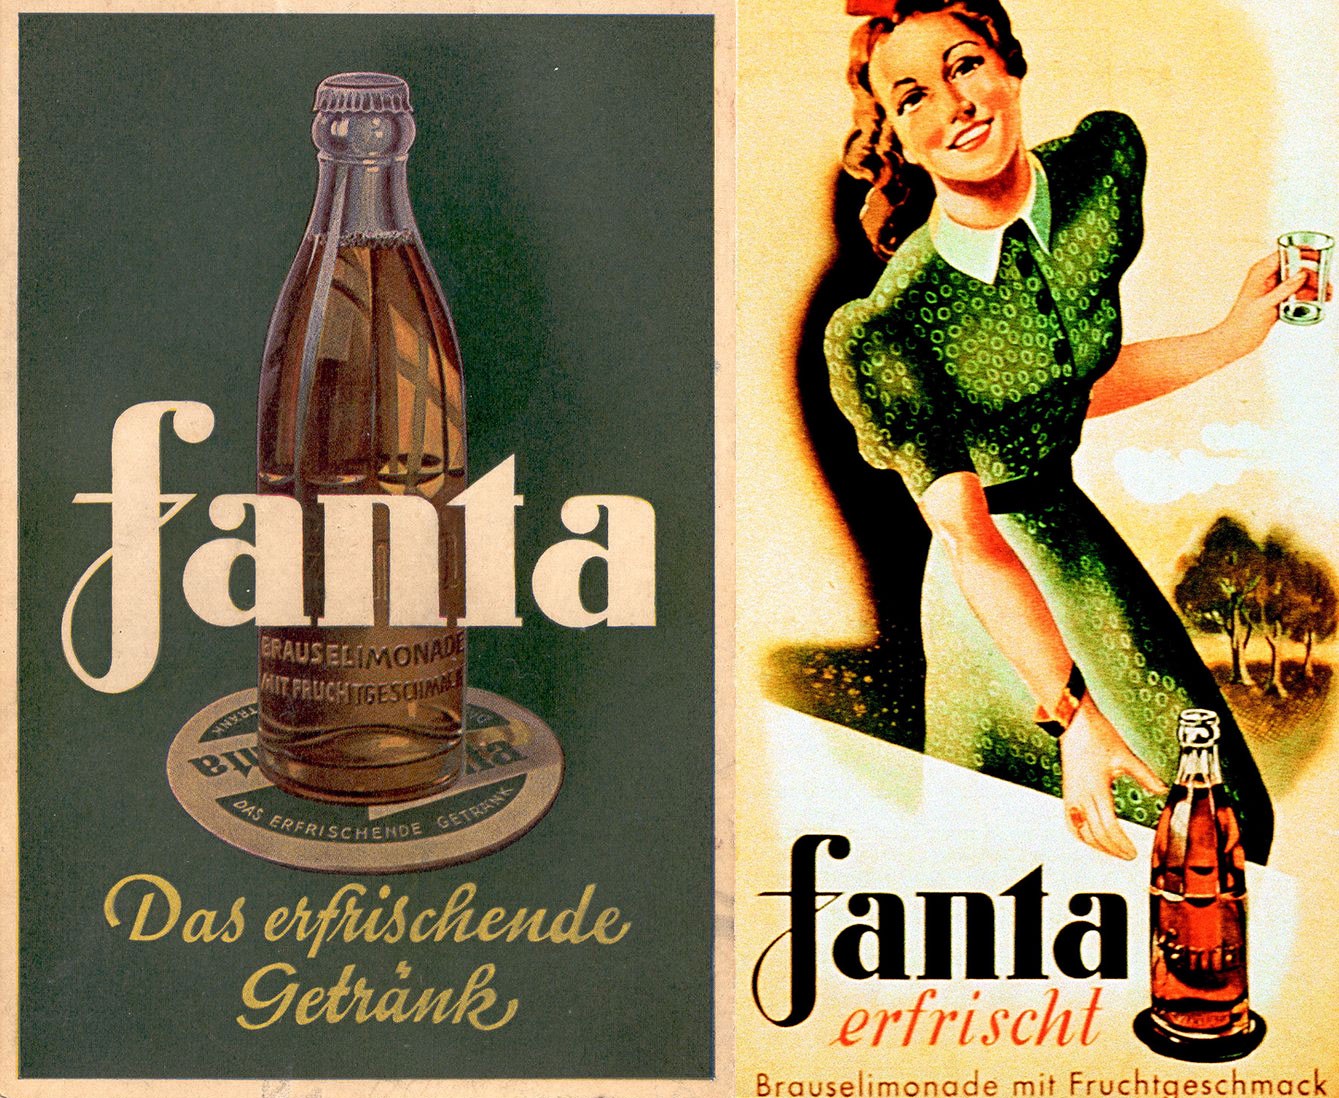 Fascinating Facts - Fanta soda was created by Coca-Cola for the Germans during WWII